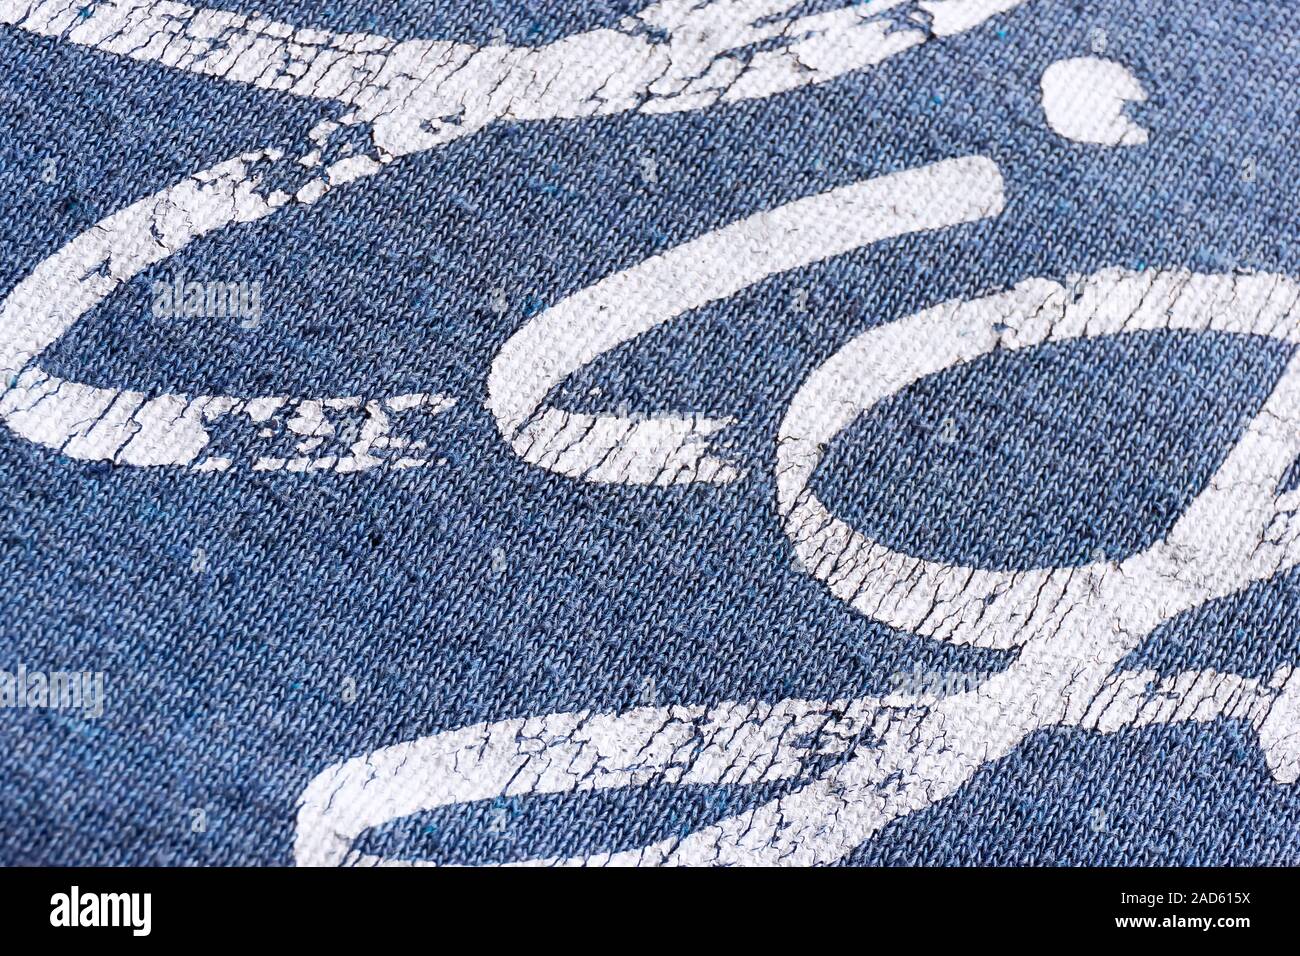 Abstract macro texture background of white typographic print on blue t-shirt Stock Photo